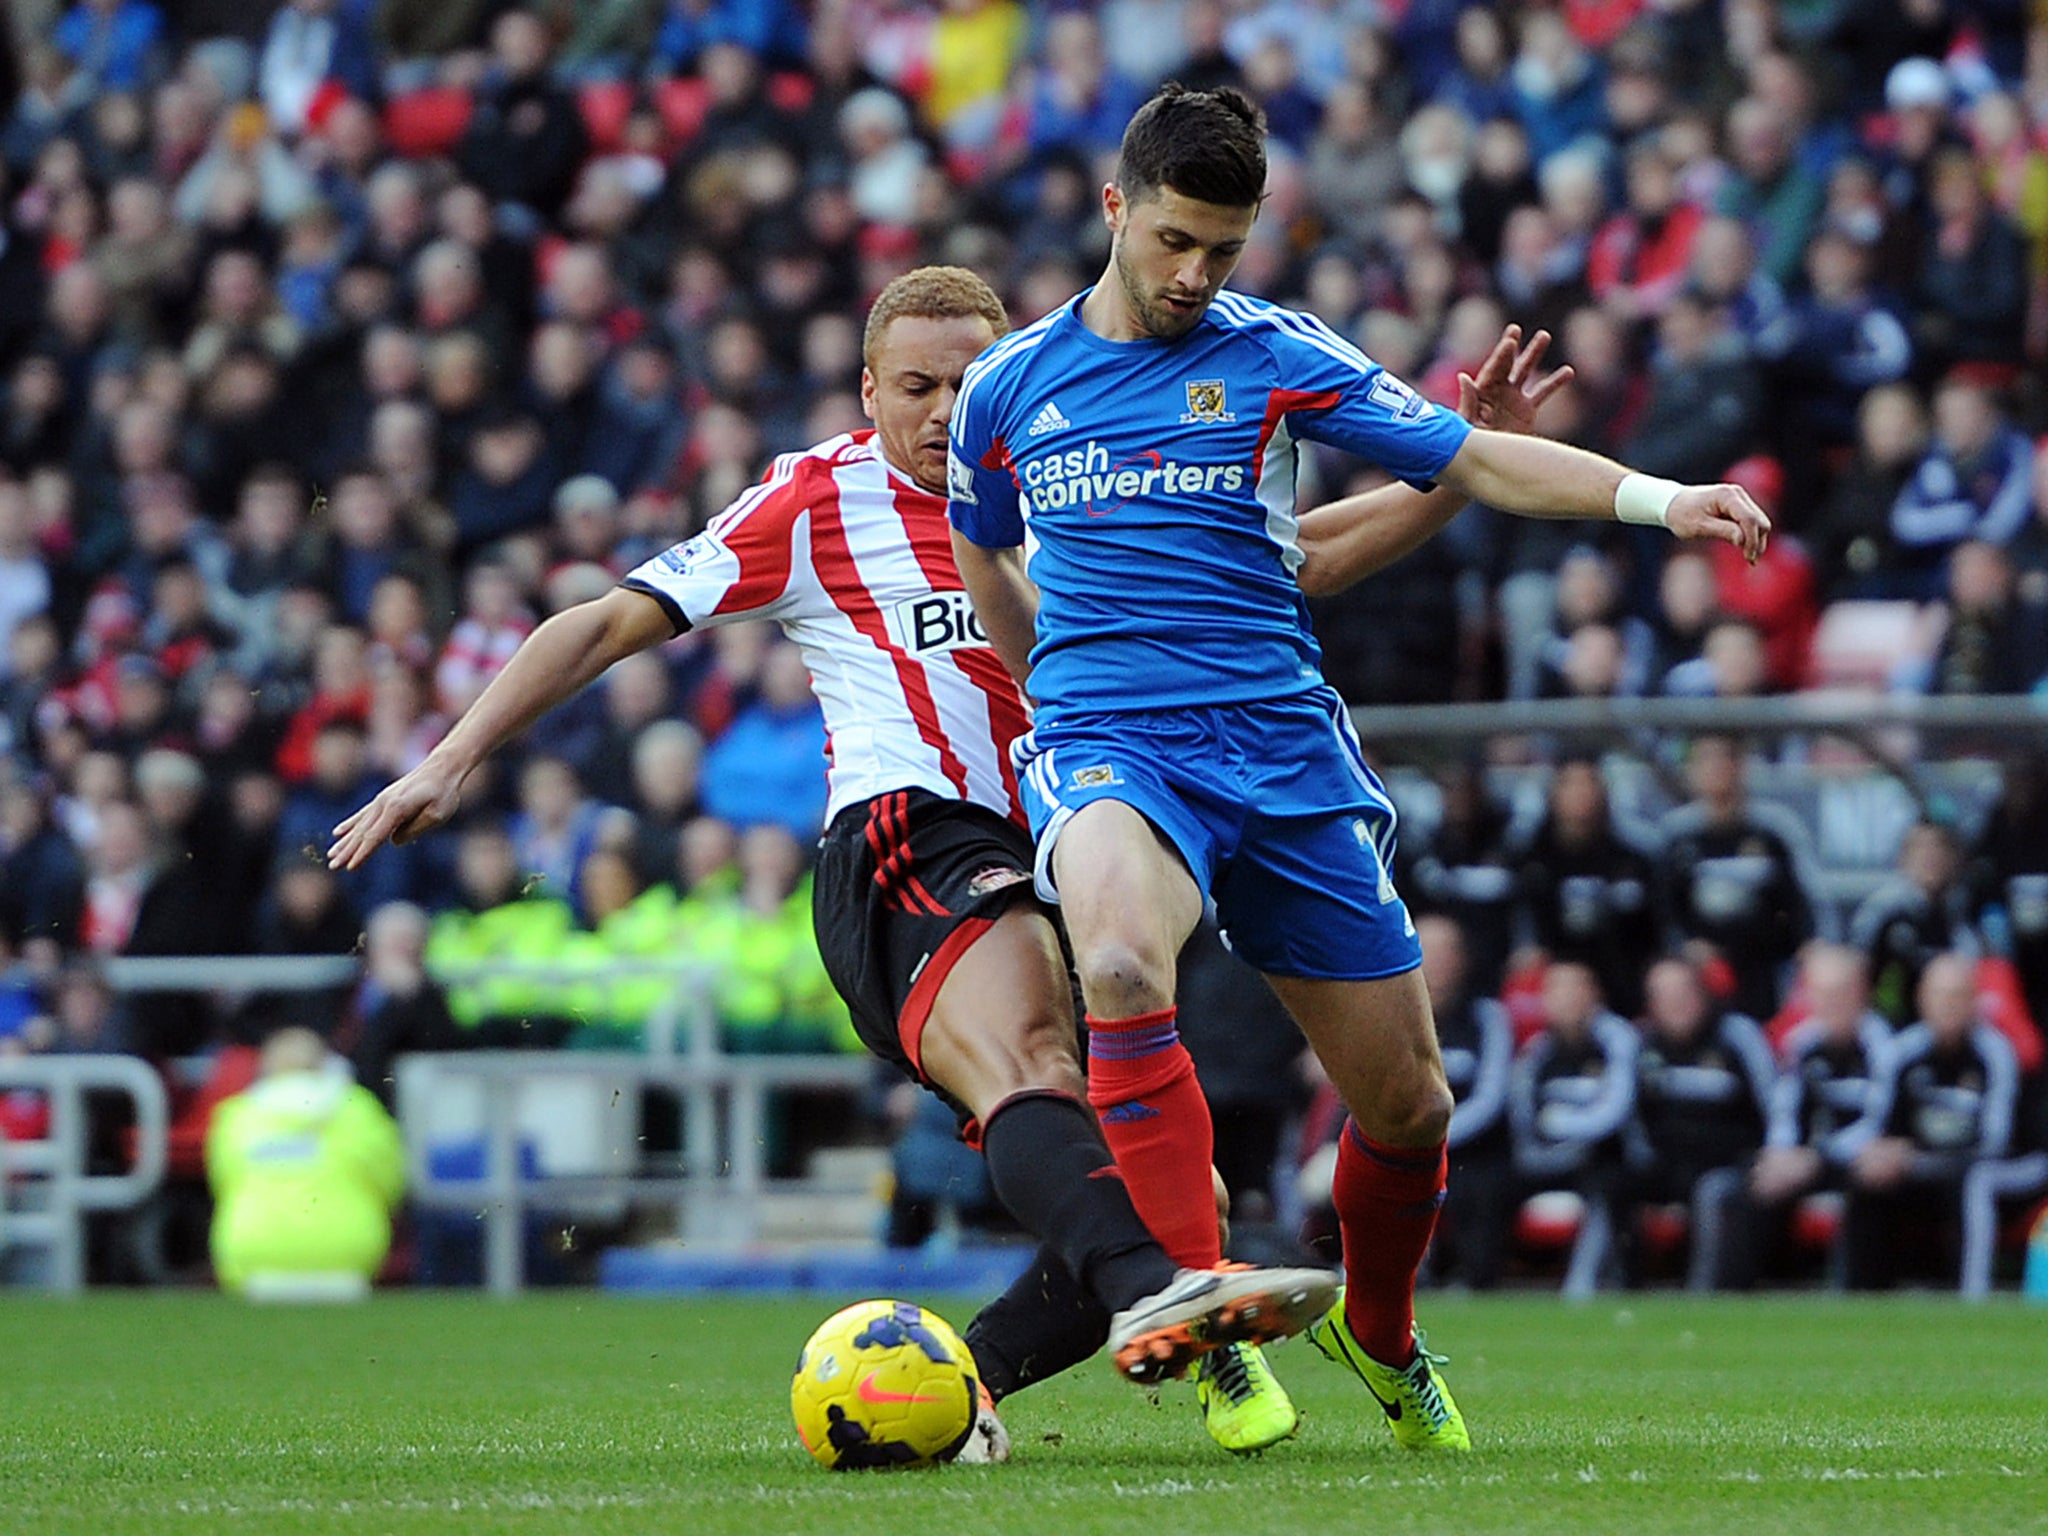 Shane Long scored his second goal in as many games for Hull in the 2-0 win over Sunderland